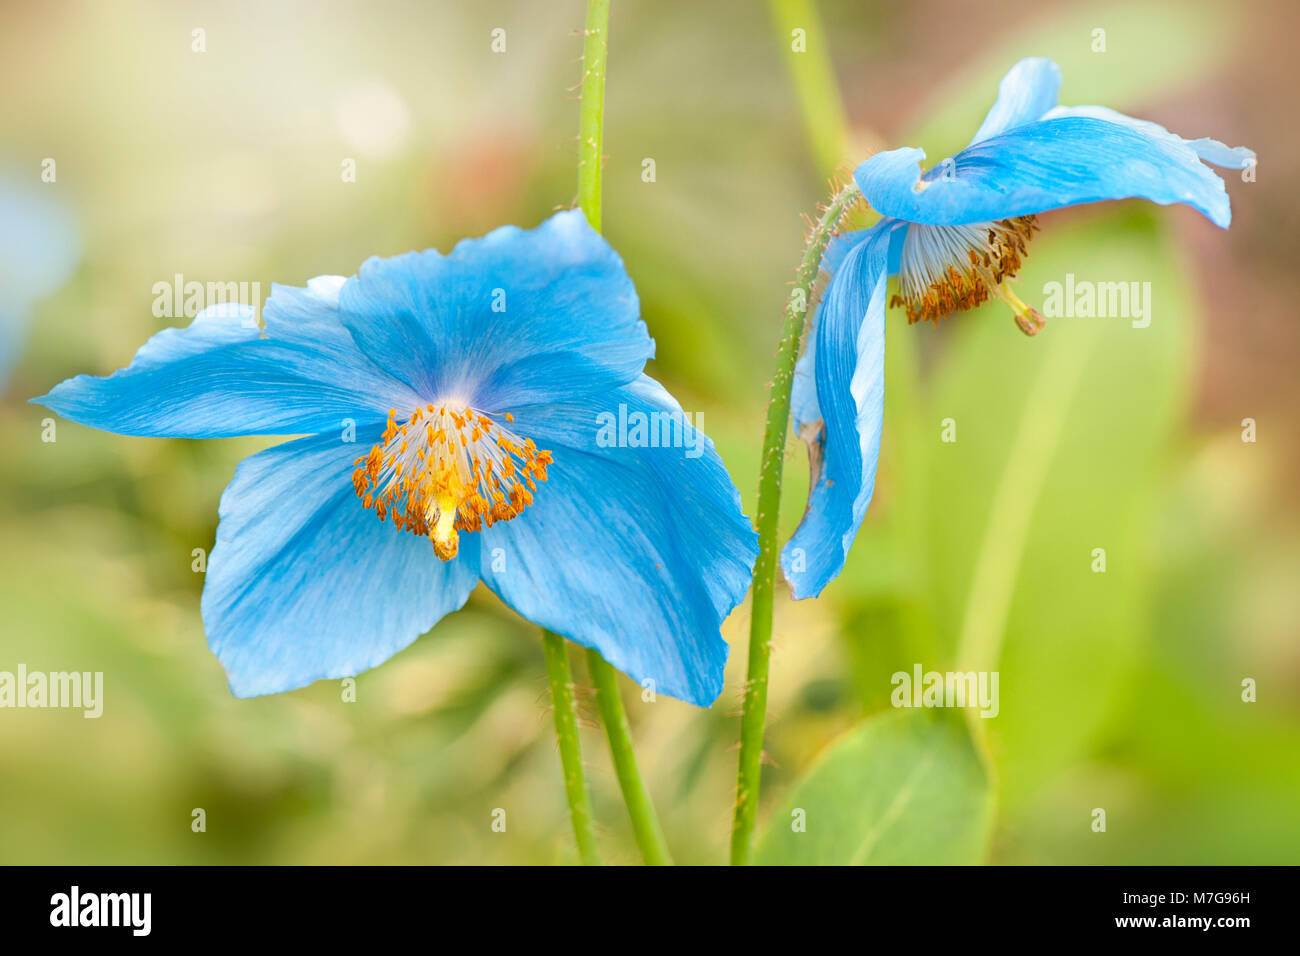 Close-up image of the summer flowering Meconopsis baileyi himalayan blue poppy flower Stock Photo